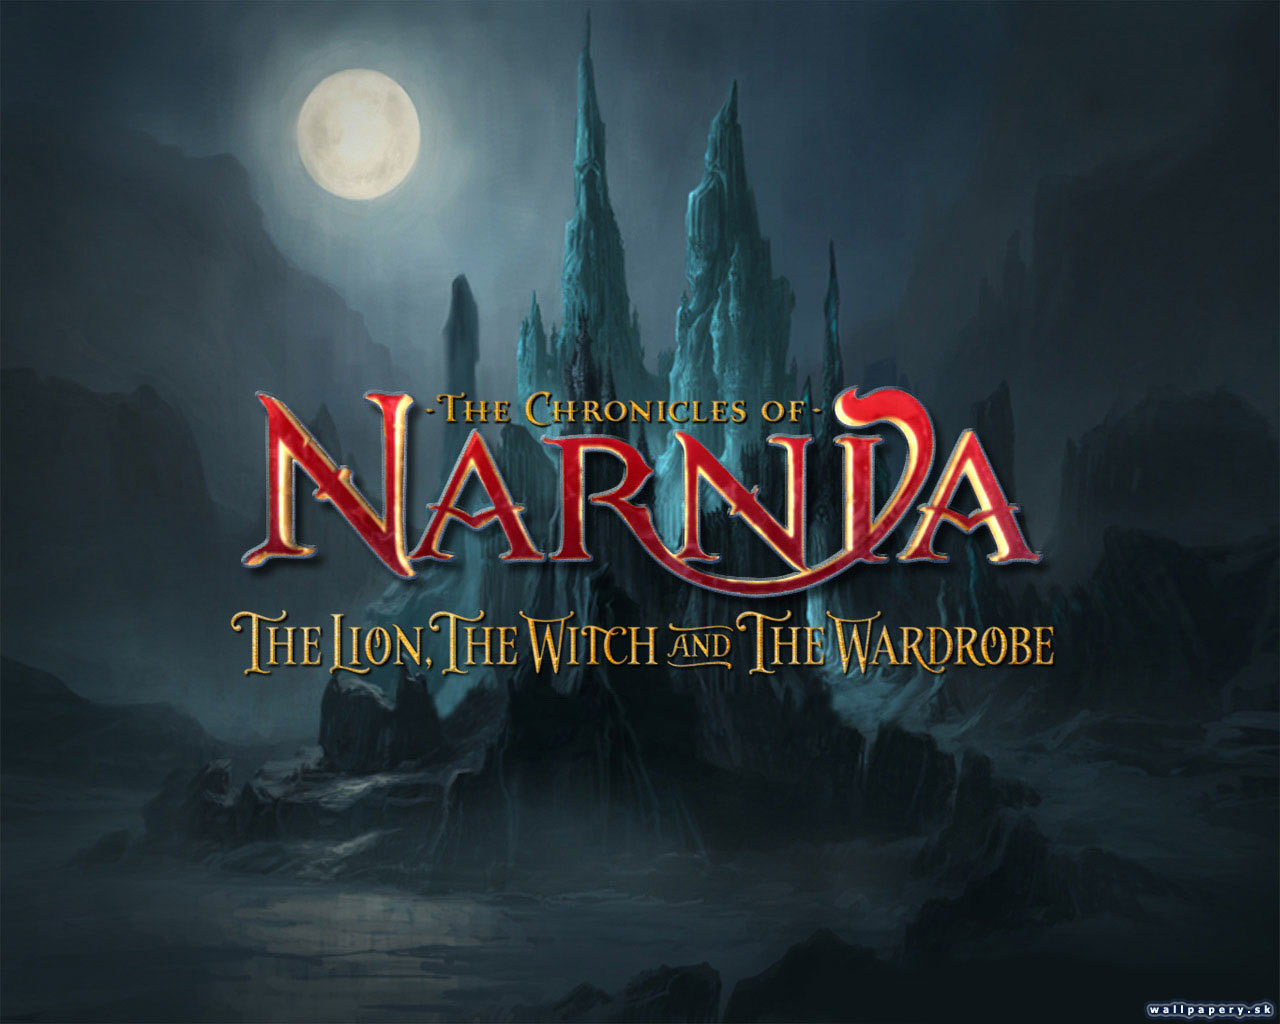 The Chronicles of Narnia: The Lion, The Witch and the Wardrobe - wallpaper 2